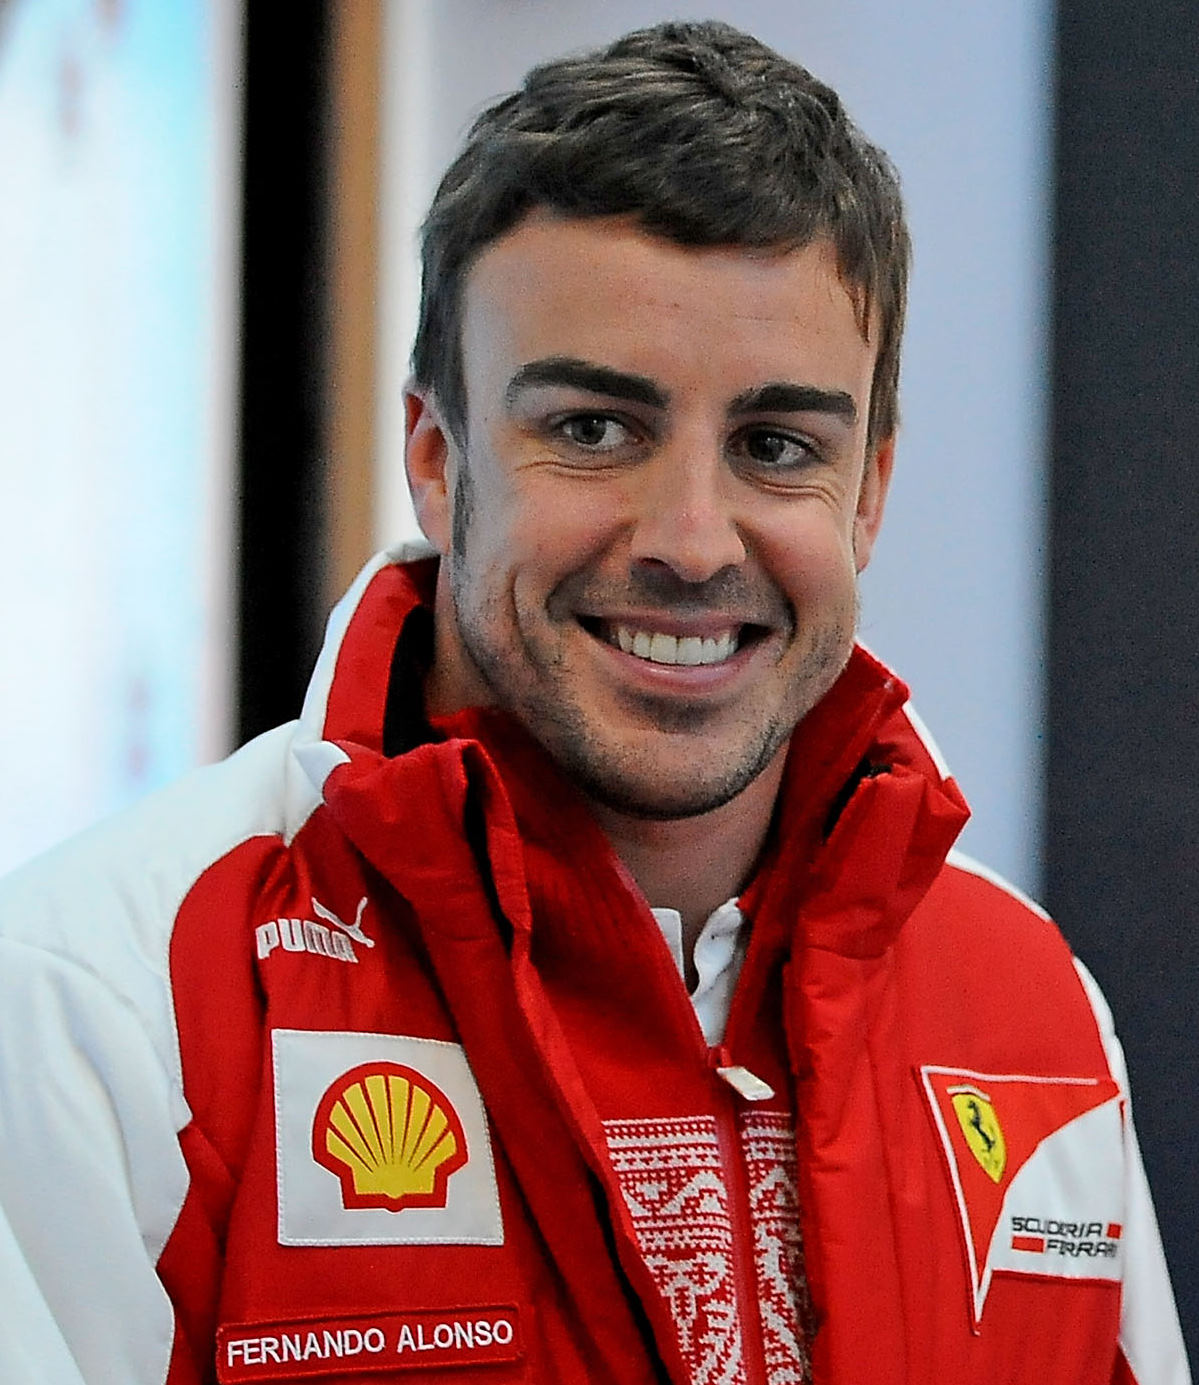 Alonso wishes he was still with Ferrari, but they signed Vettel and he was gone